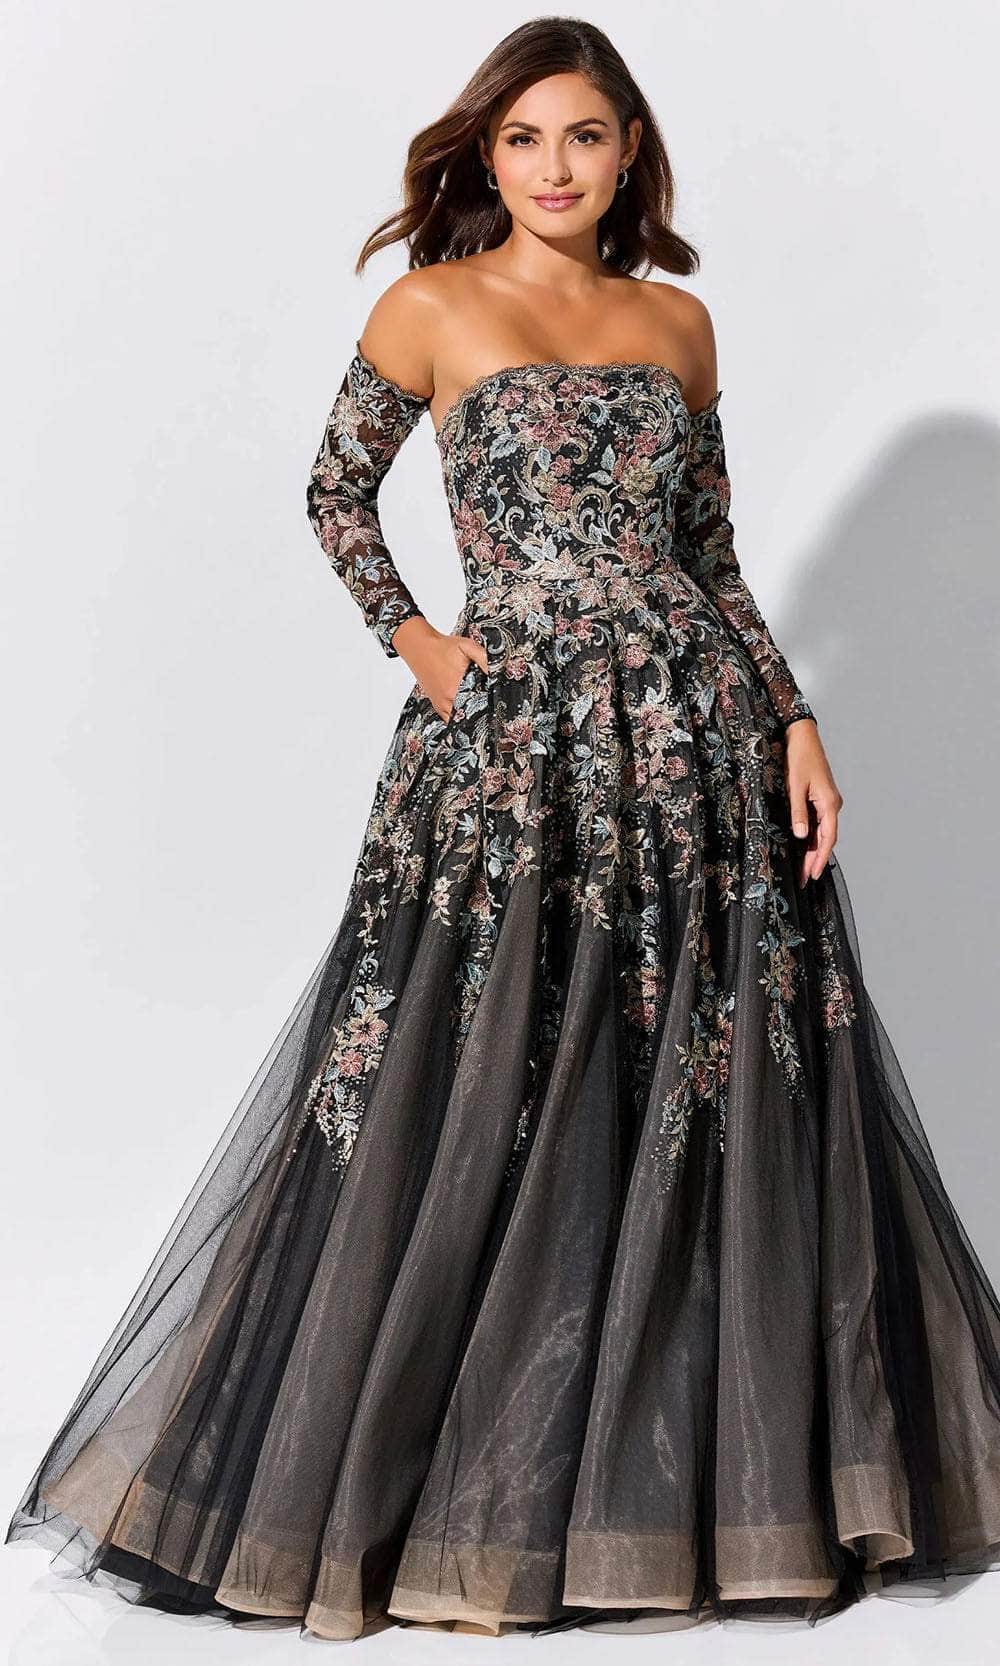 Ivonne D ID327 - Sequin Embellished Strapless Prom Gown
